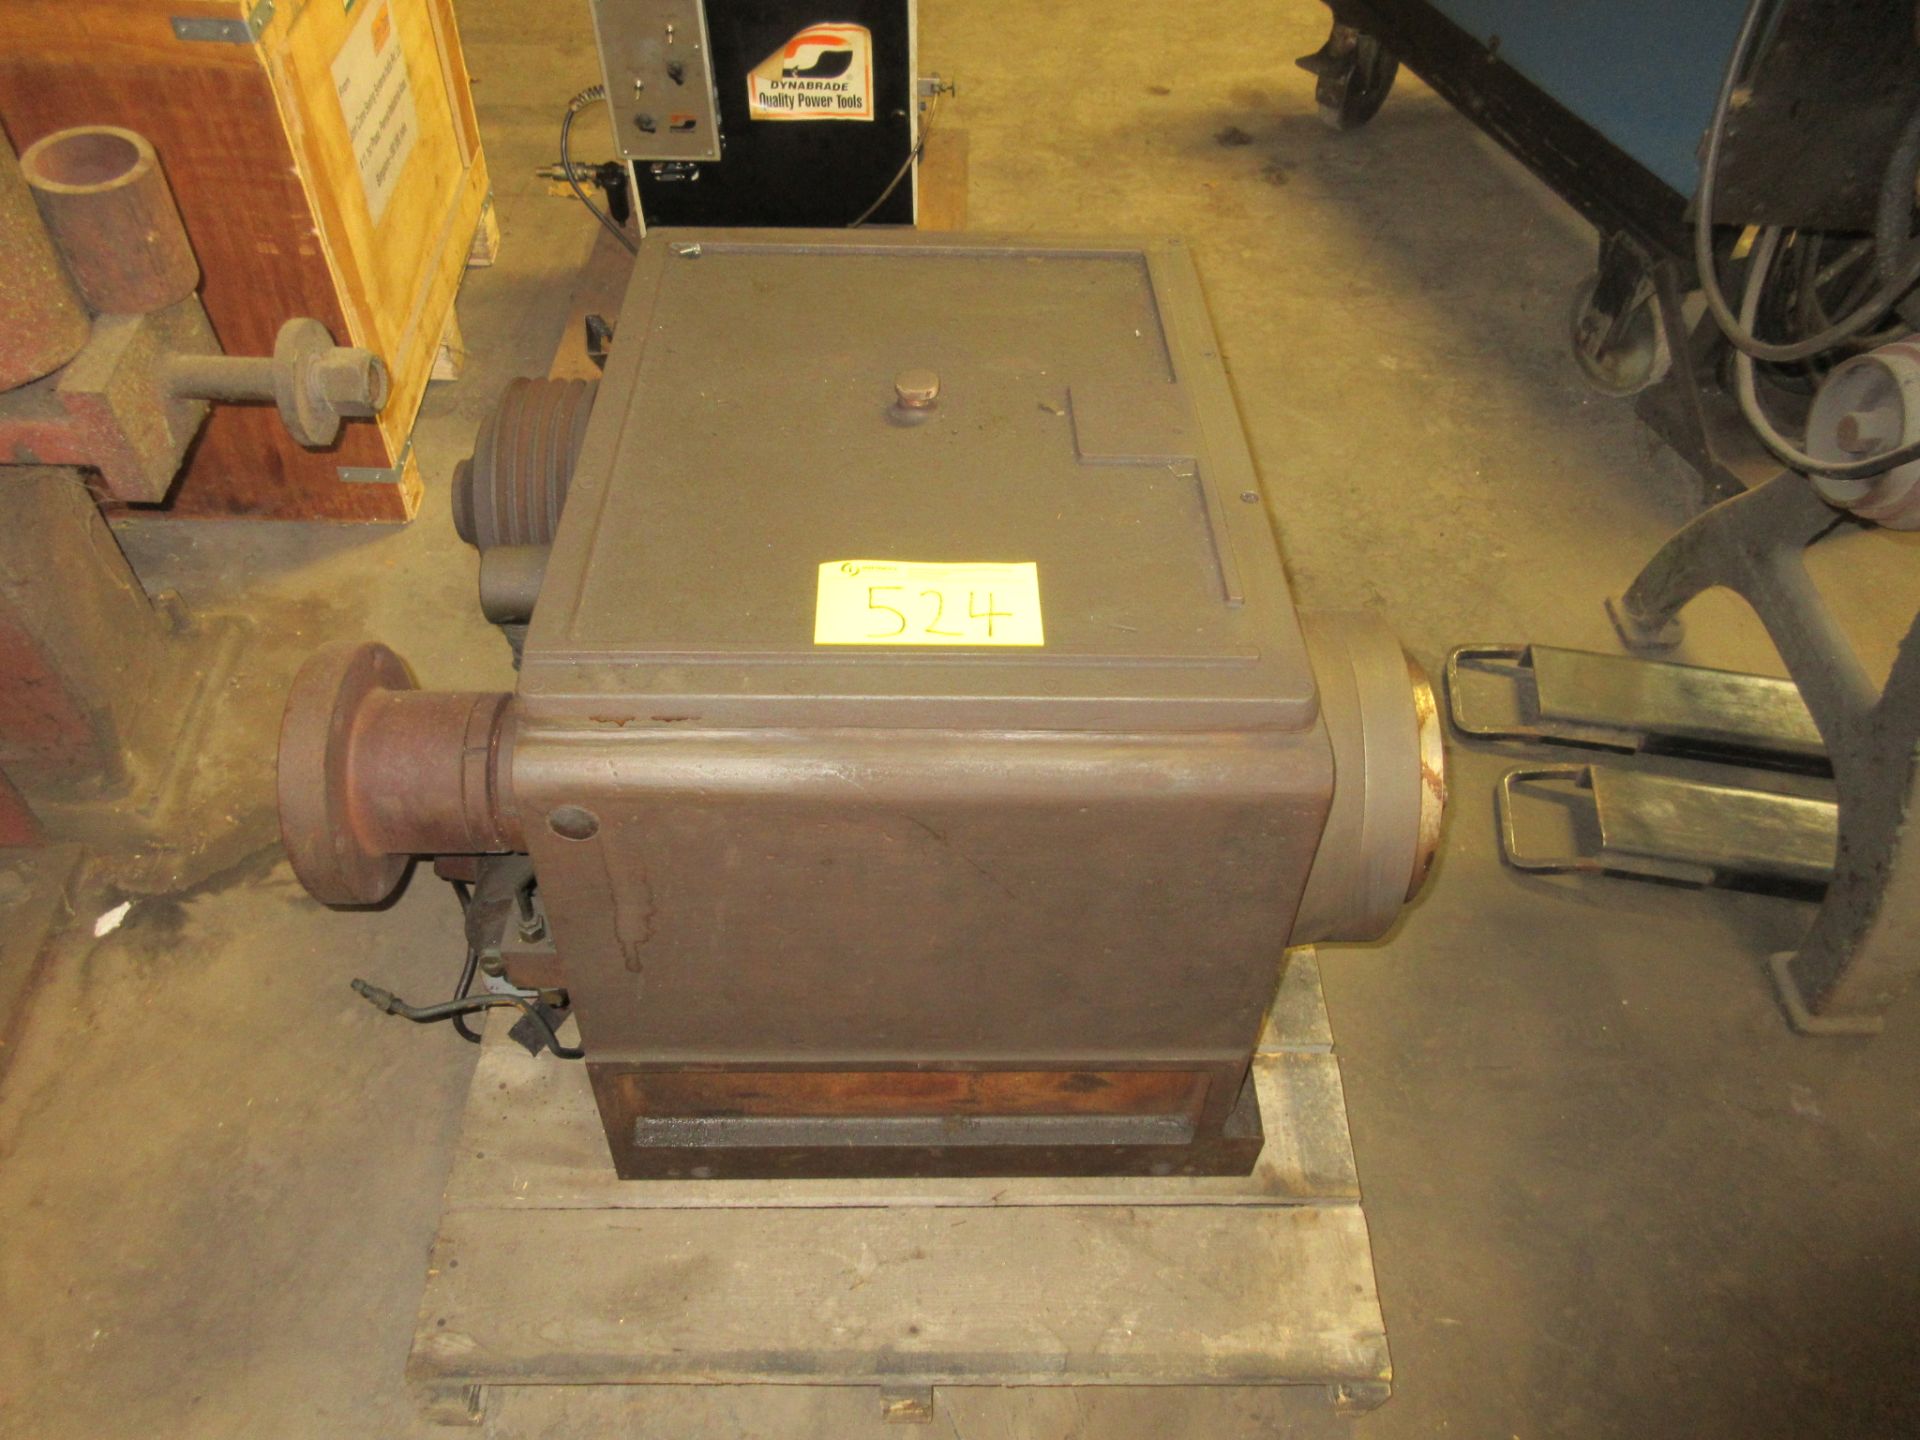 APPROX. 36"W X 28"L X 22"H GEARBOX ON PALLET